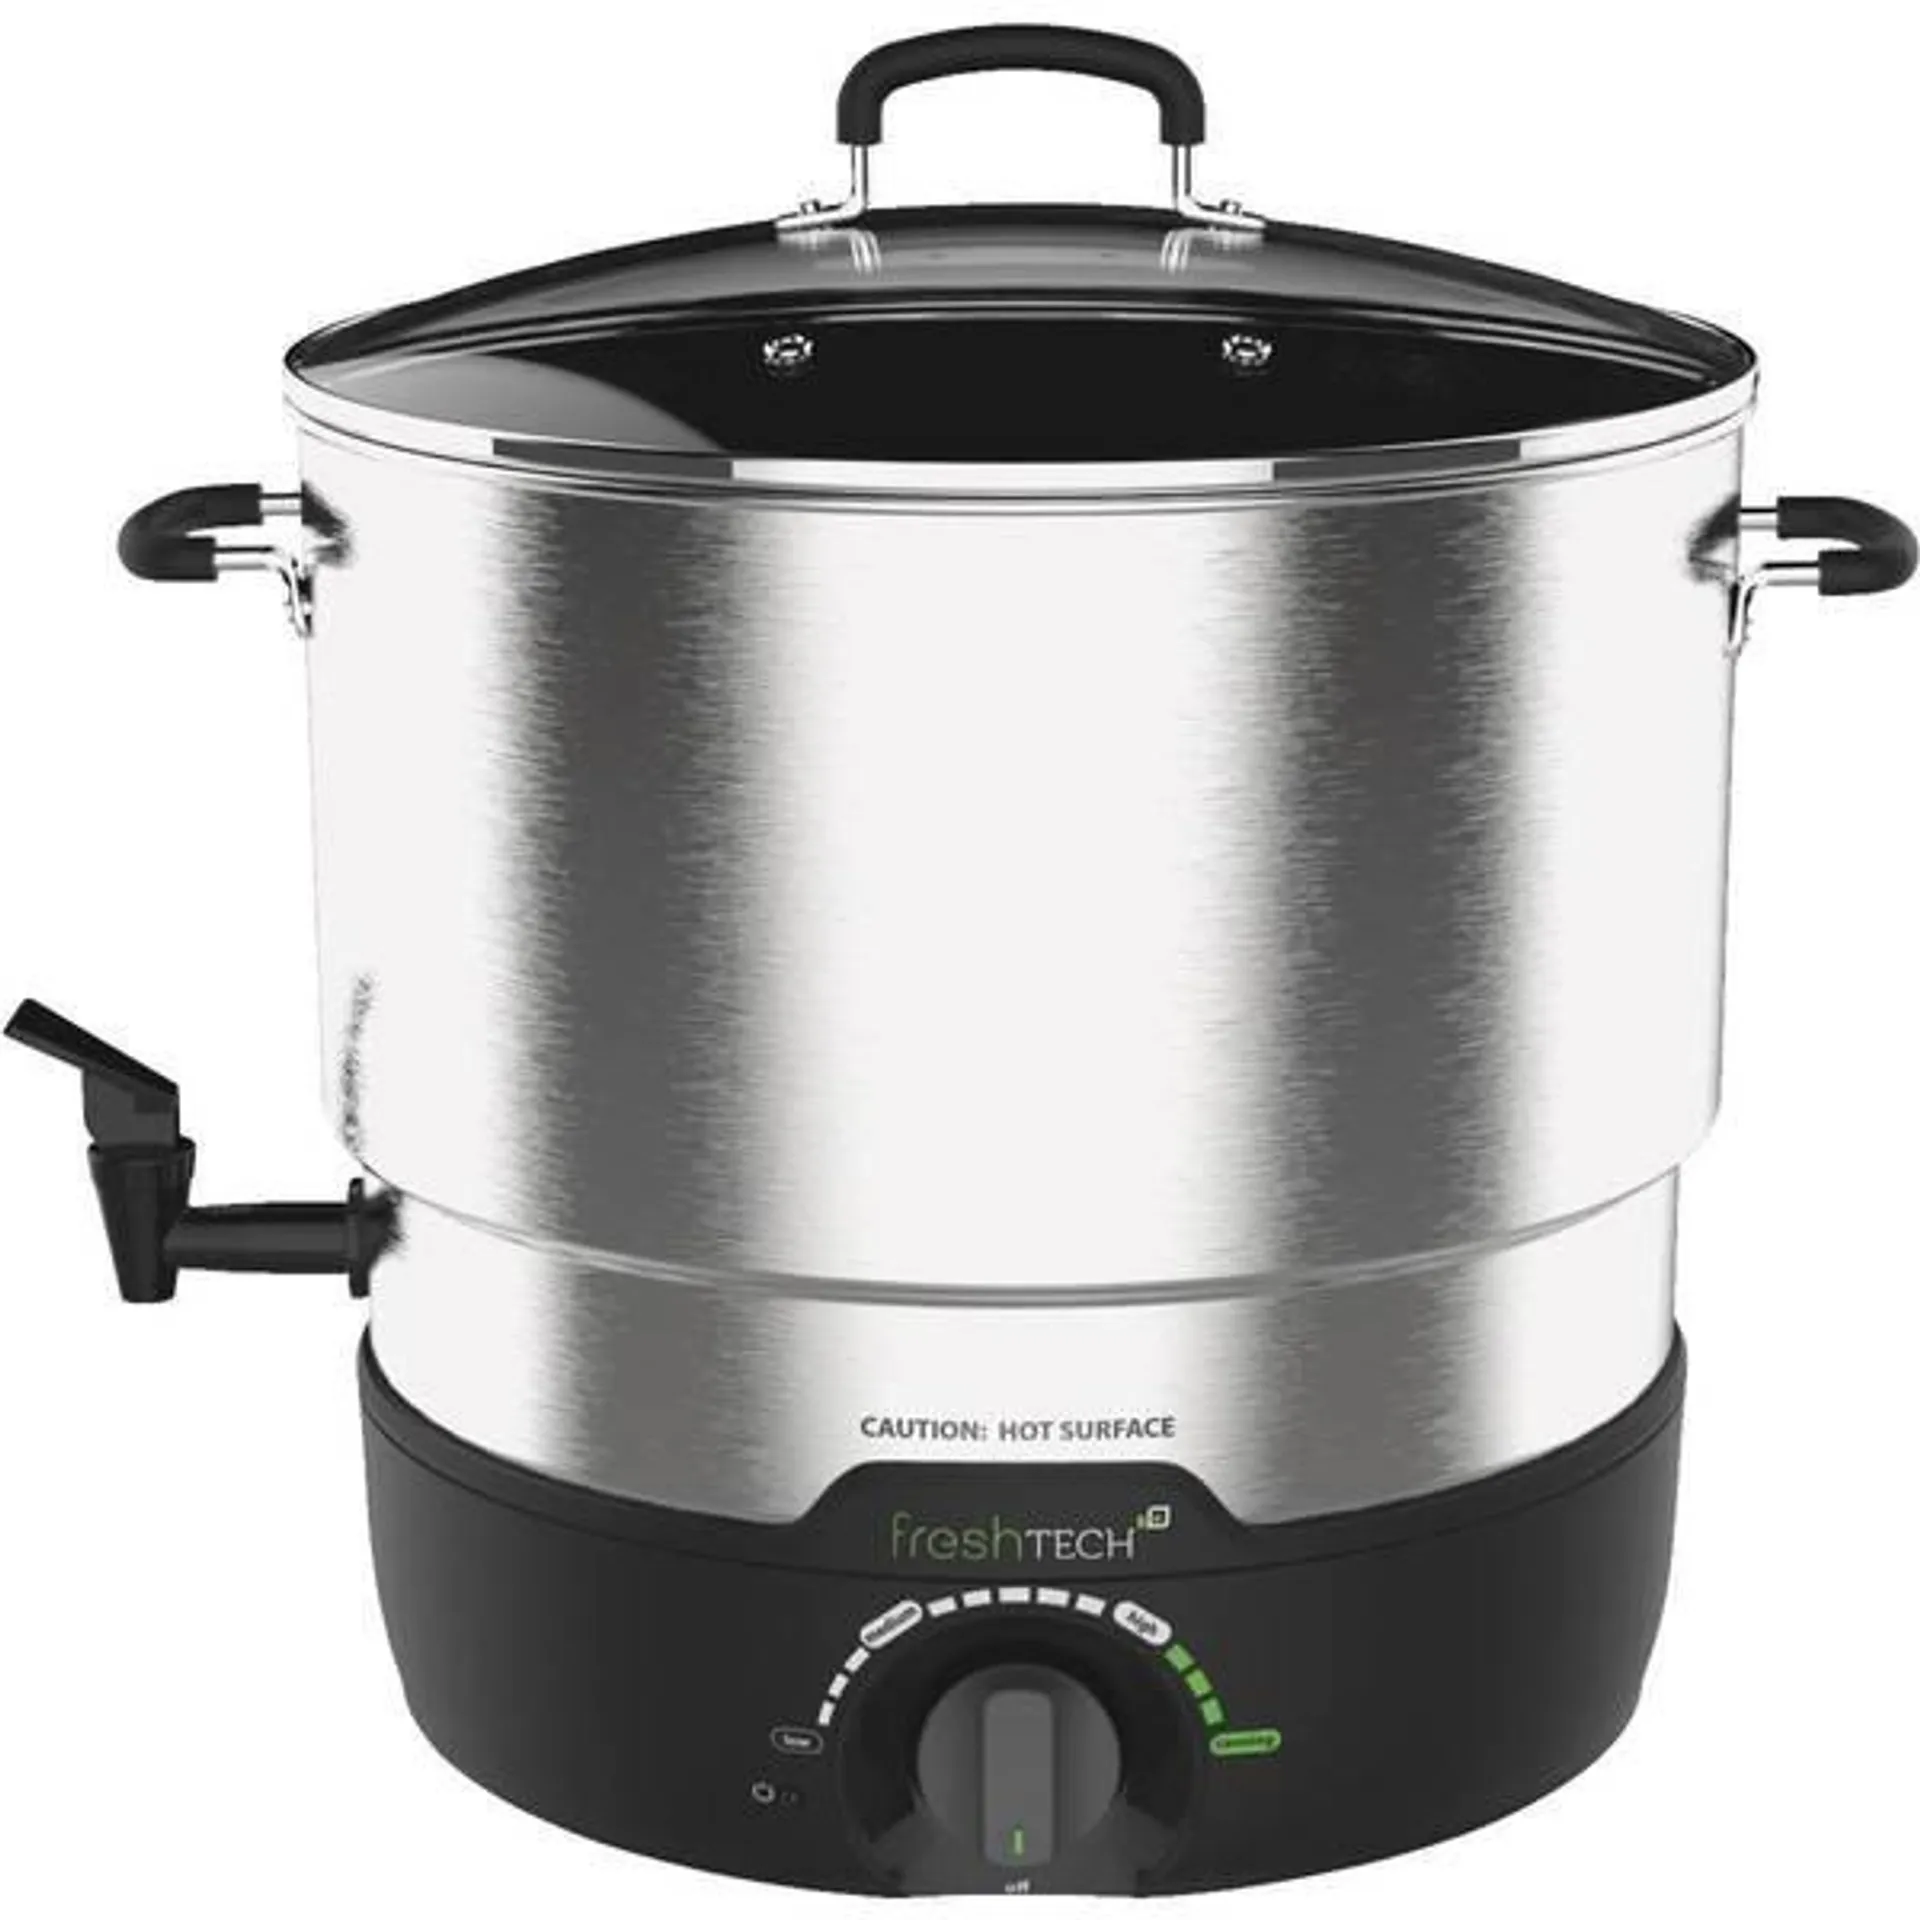 21 Quart freshTECH Electric Water Bath Canner with Multi-Cooker